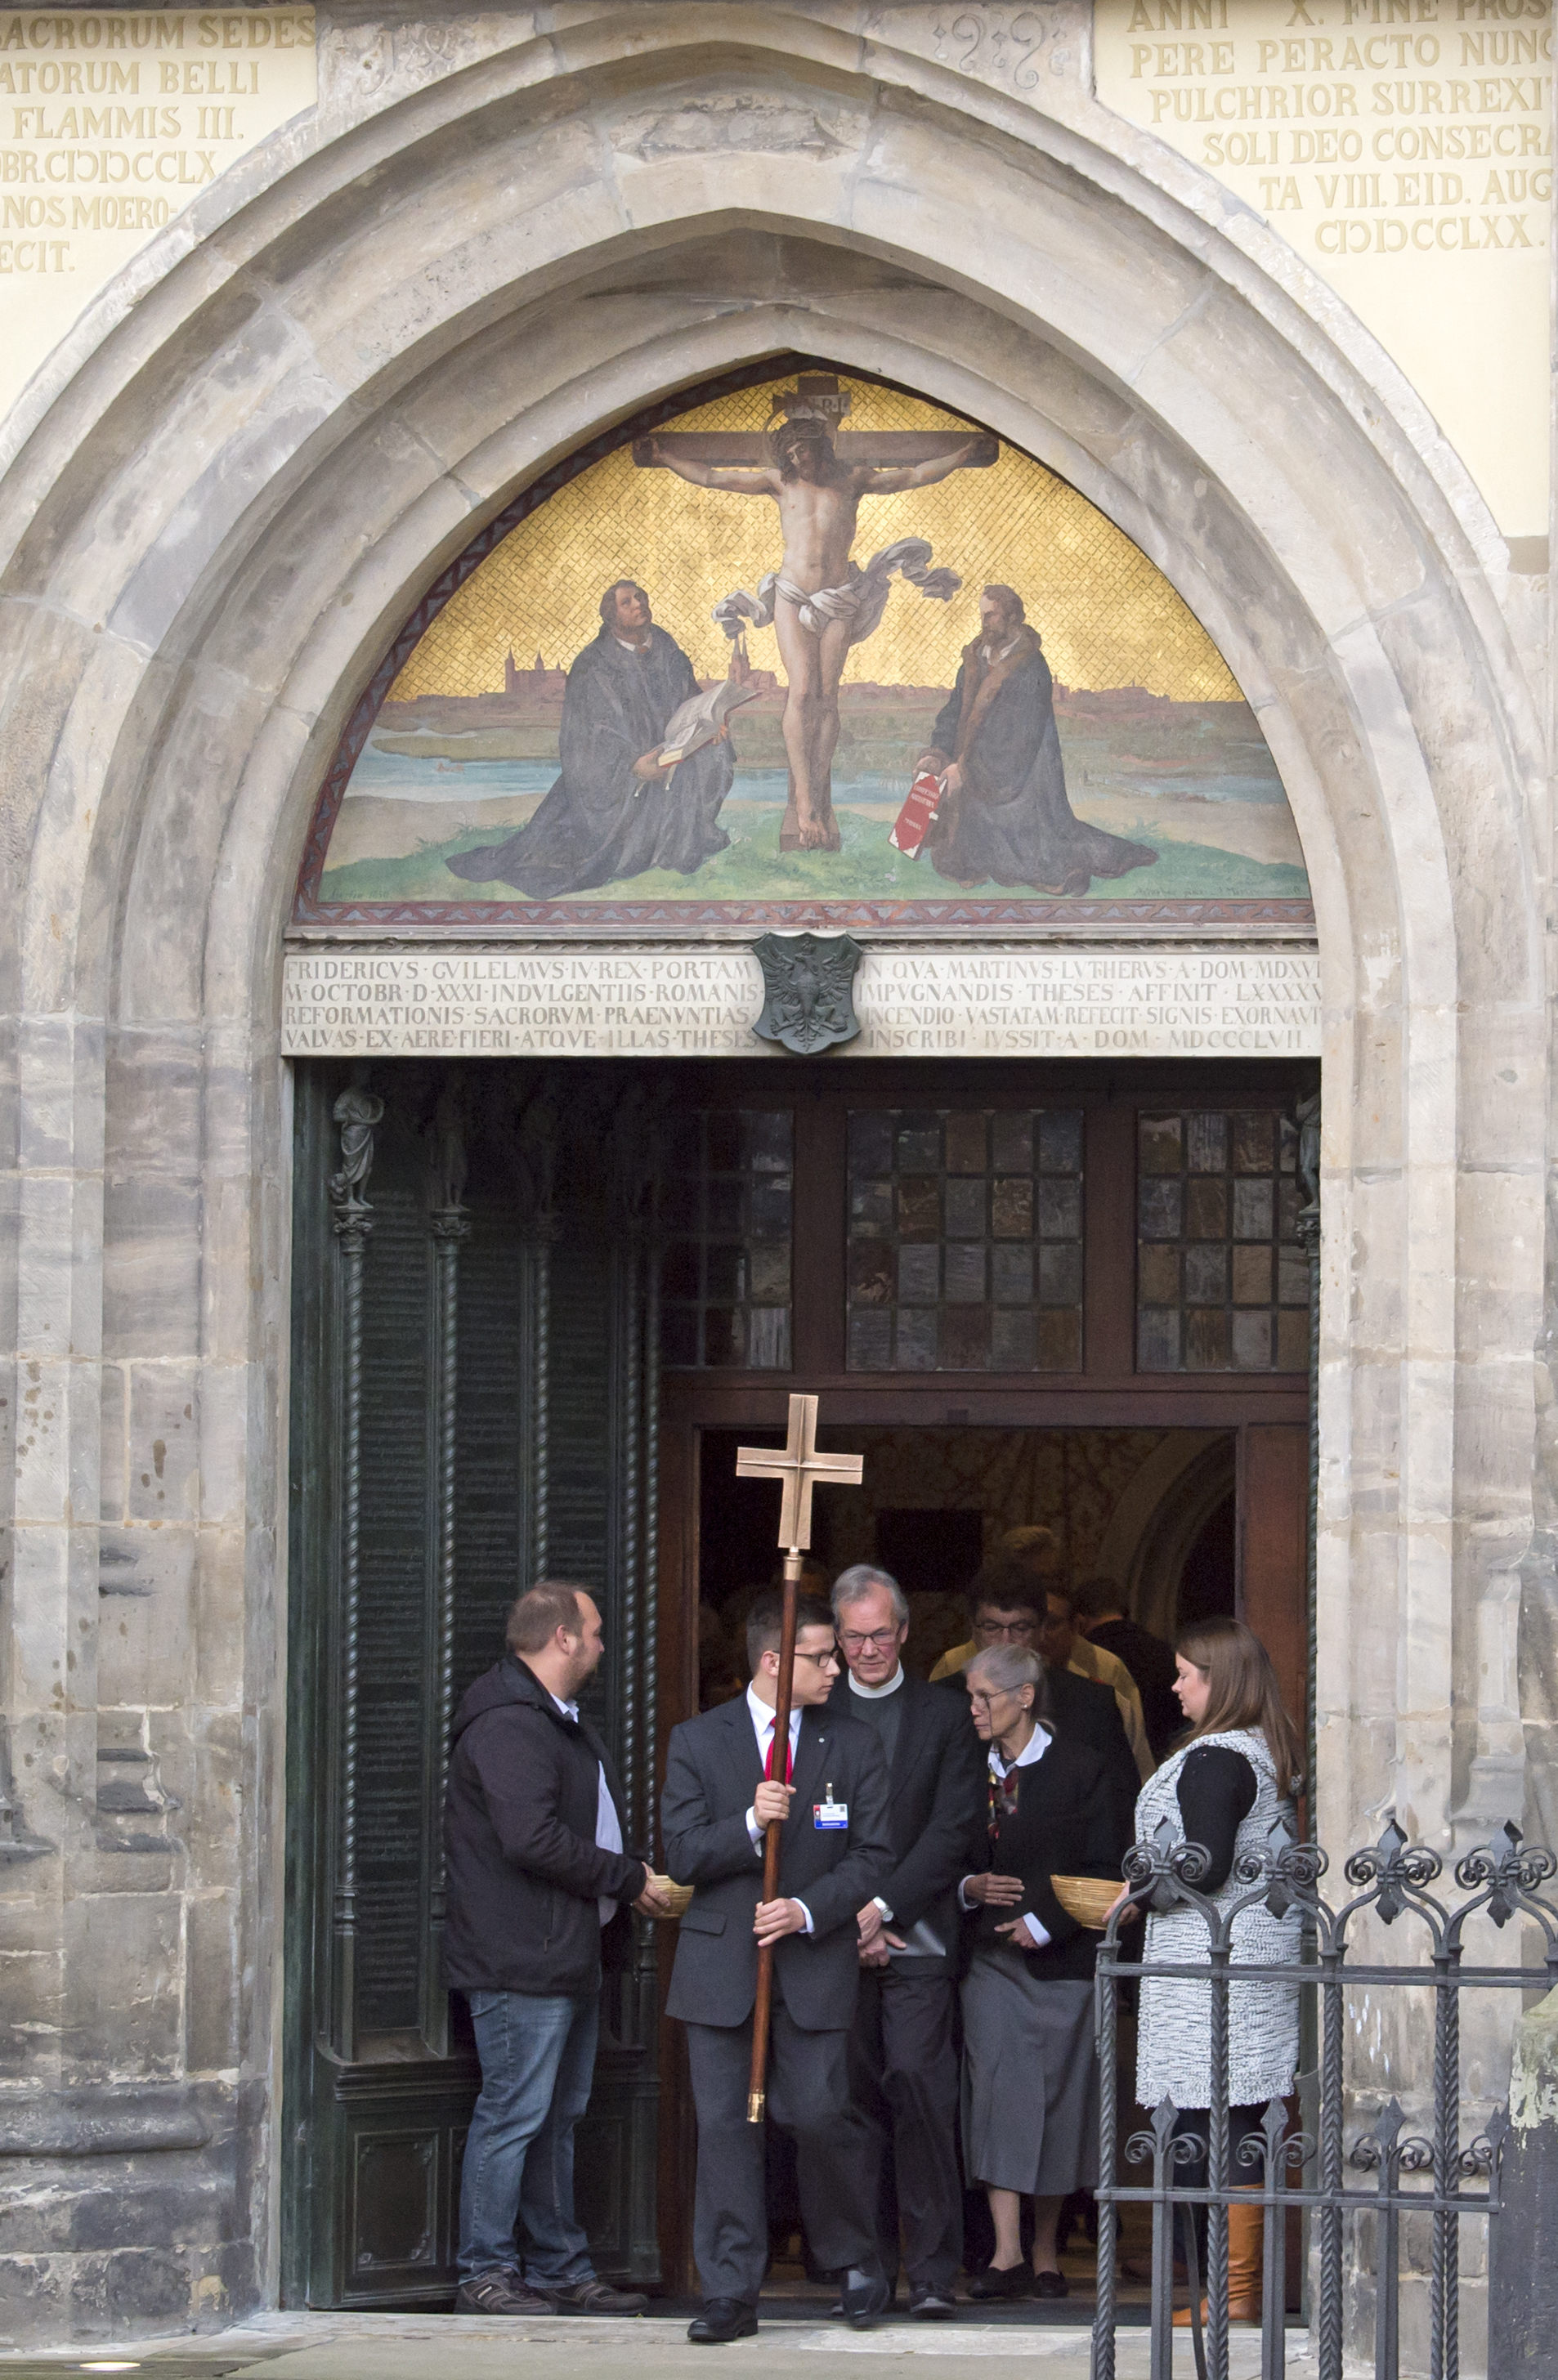 Believers leave  after a public service on the occasion the 500th Anniversary of the Reformation in the Castle Church Wittenberg, Germany, Tuesday, Oct. 31, 2017. German leaders will mark the 500th anniversary of the day Martin Luther is said to have nailed his theses challenging the Catholic Church's practice of selling indulgences to a church door, a starting point of the Reformation. (AP Photo/Jens Meyer)